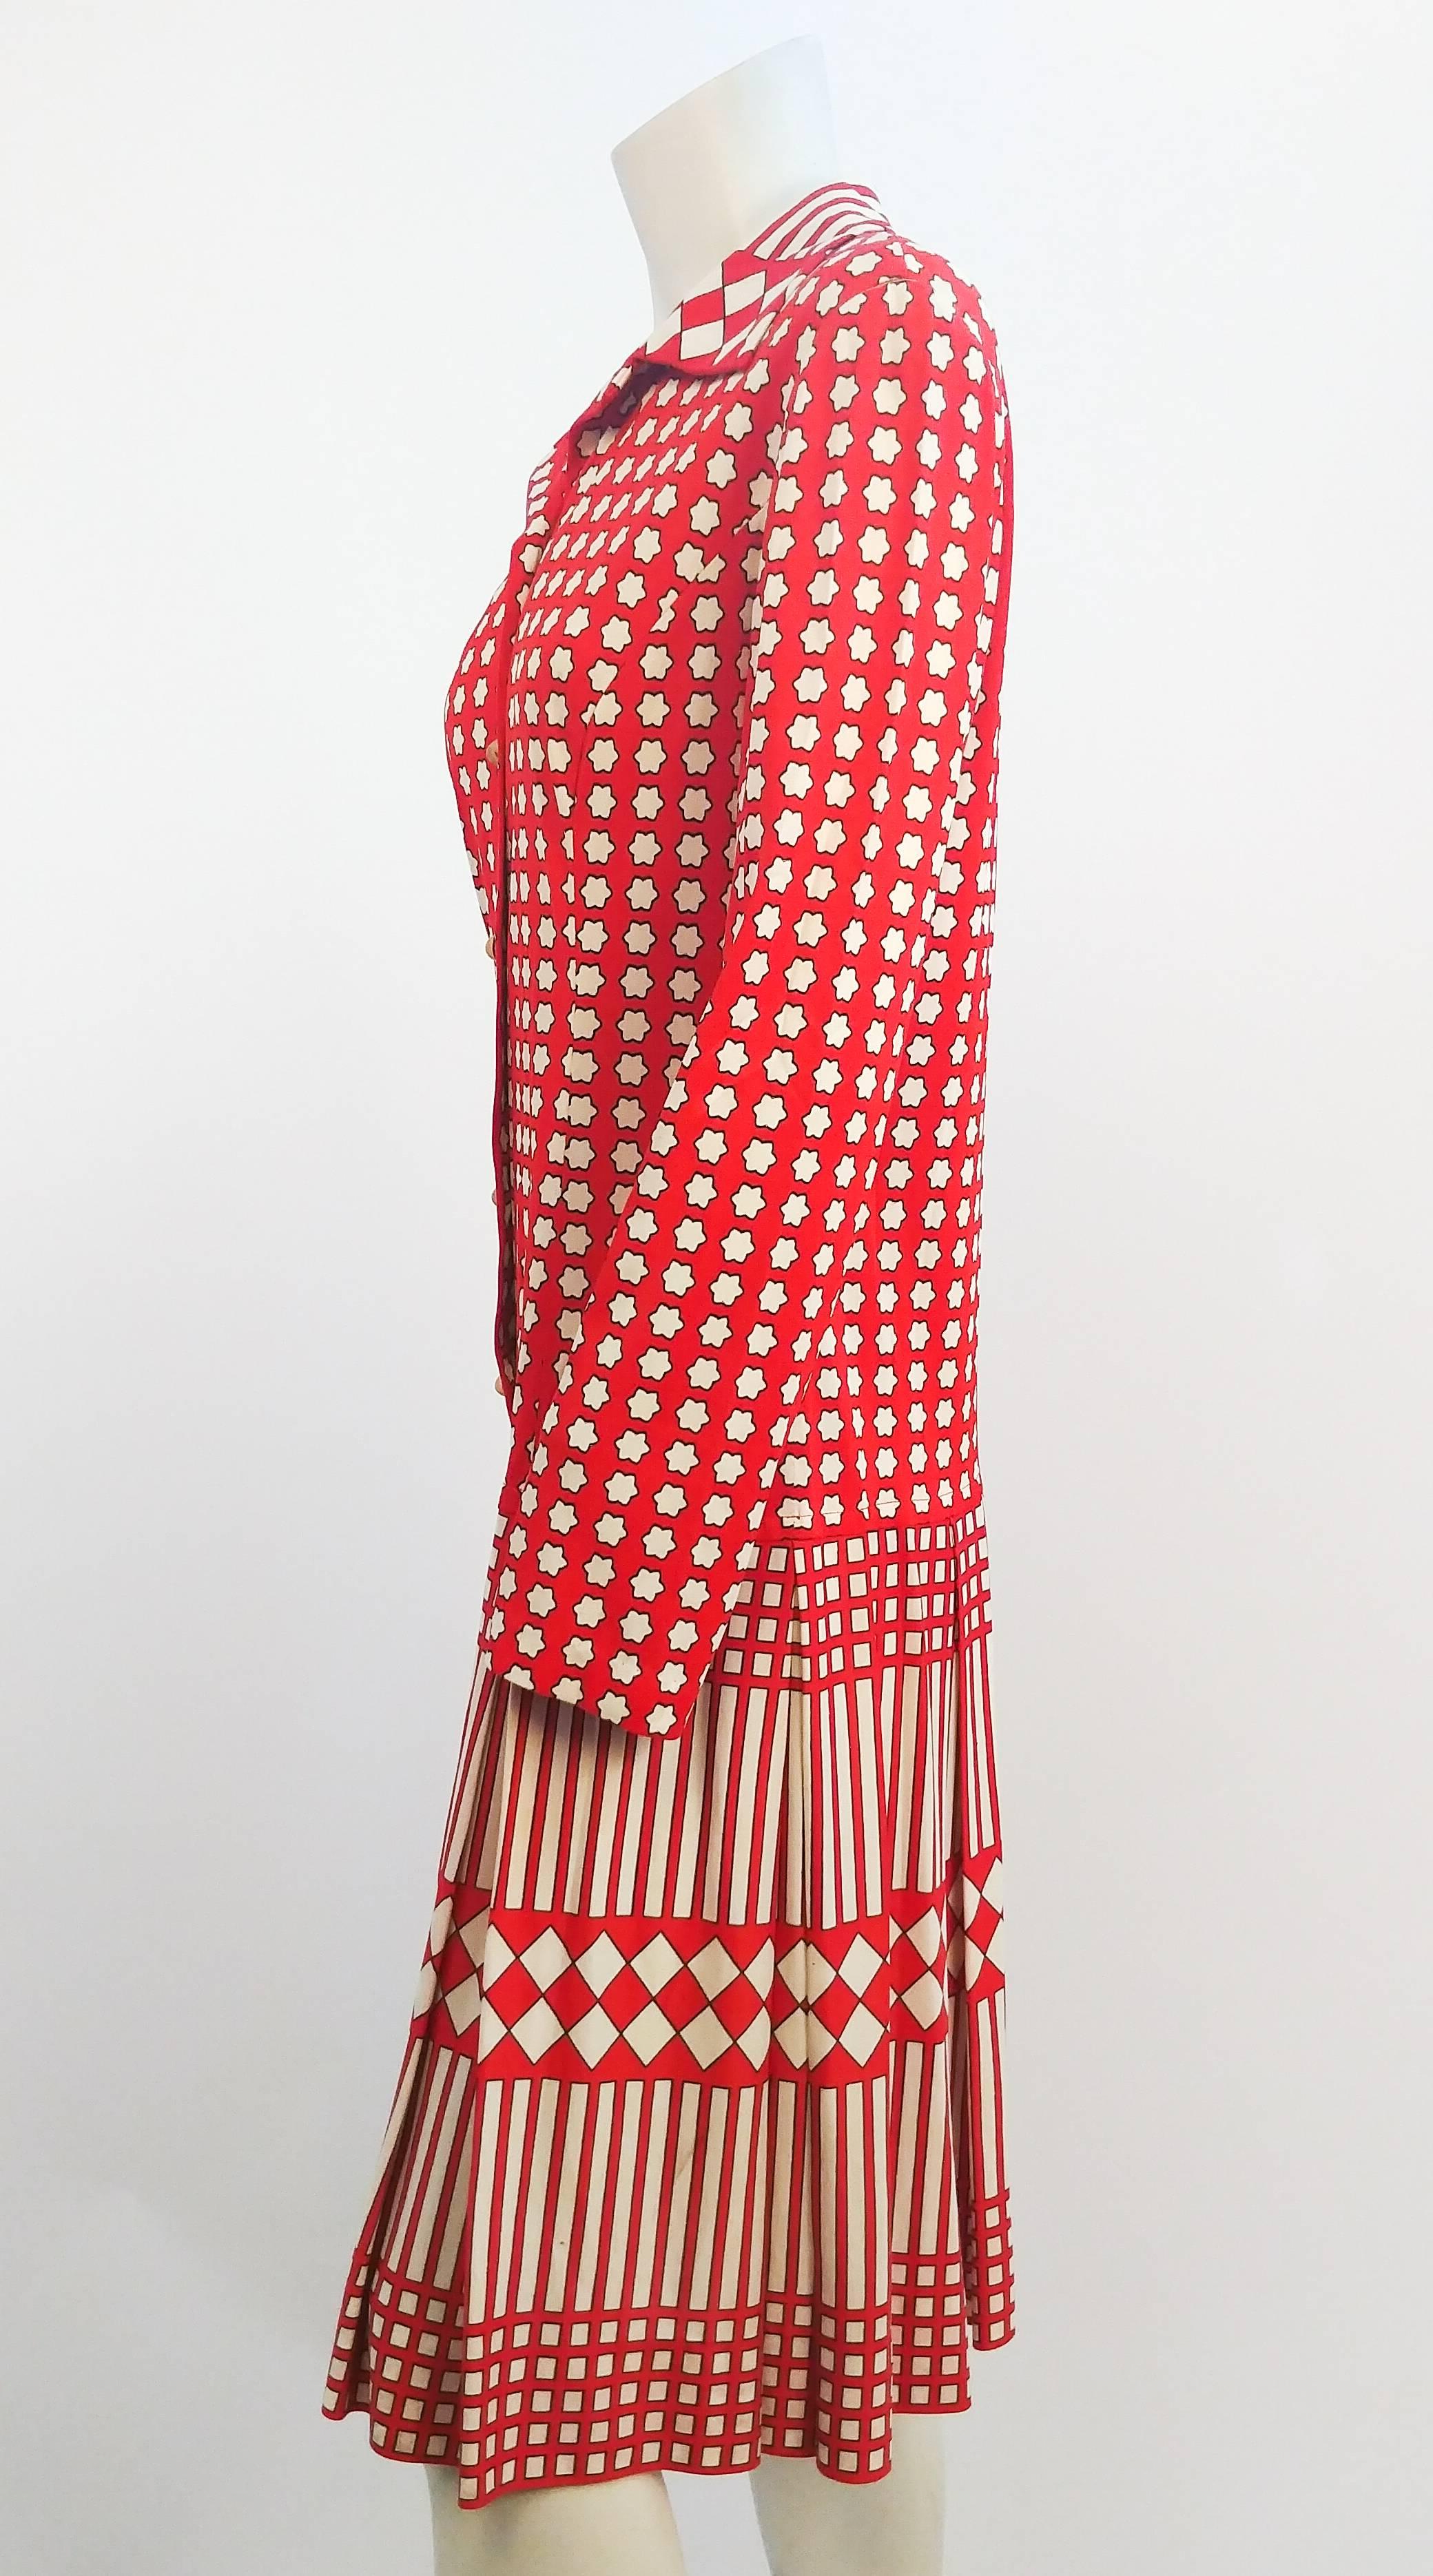 1960s Red & White Print Drop Waist Dress. Geometric print design consists of flowers, diamonds, and stripes. Pleated skirt. Buttons up front with gold hammered buttons. Polyester stretch jersey. 